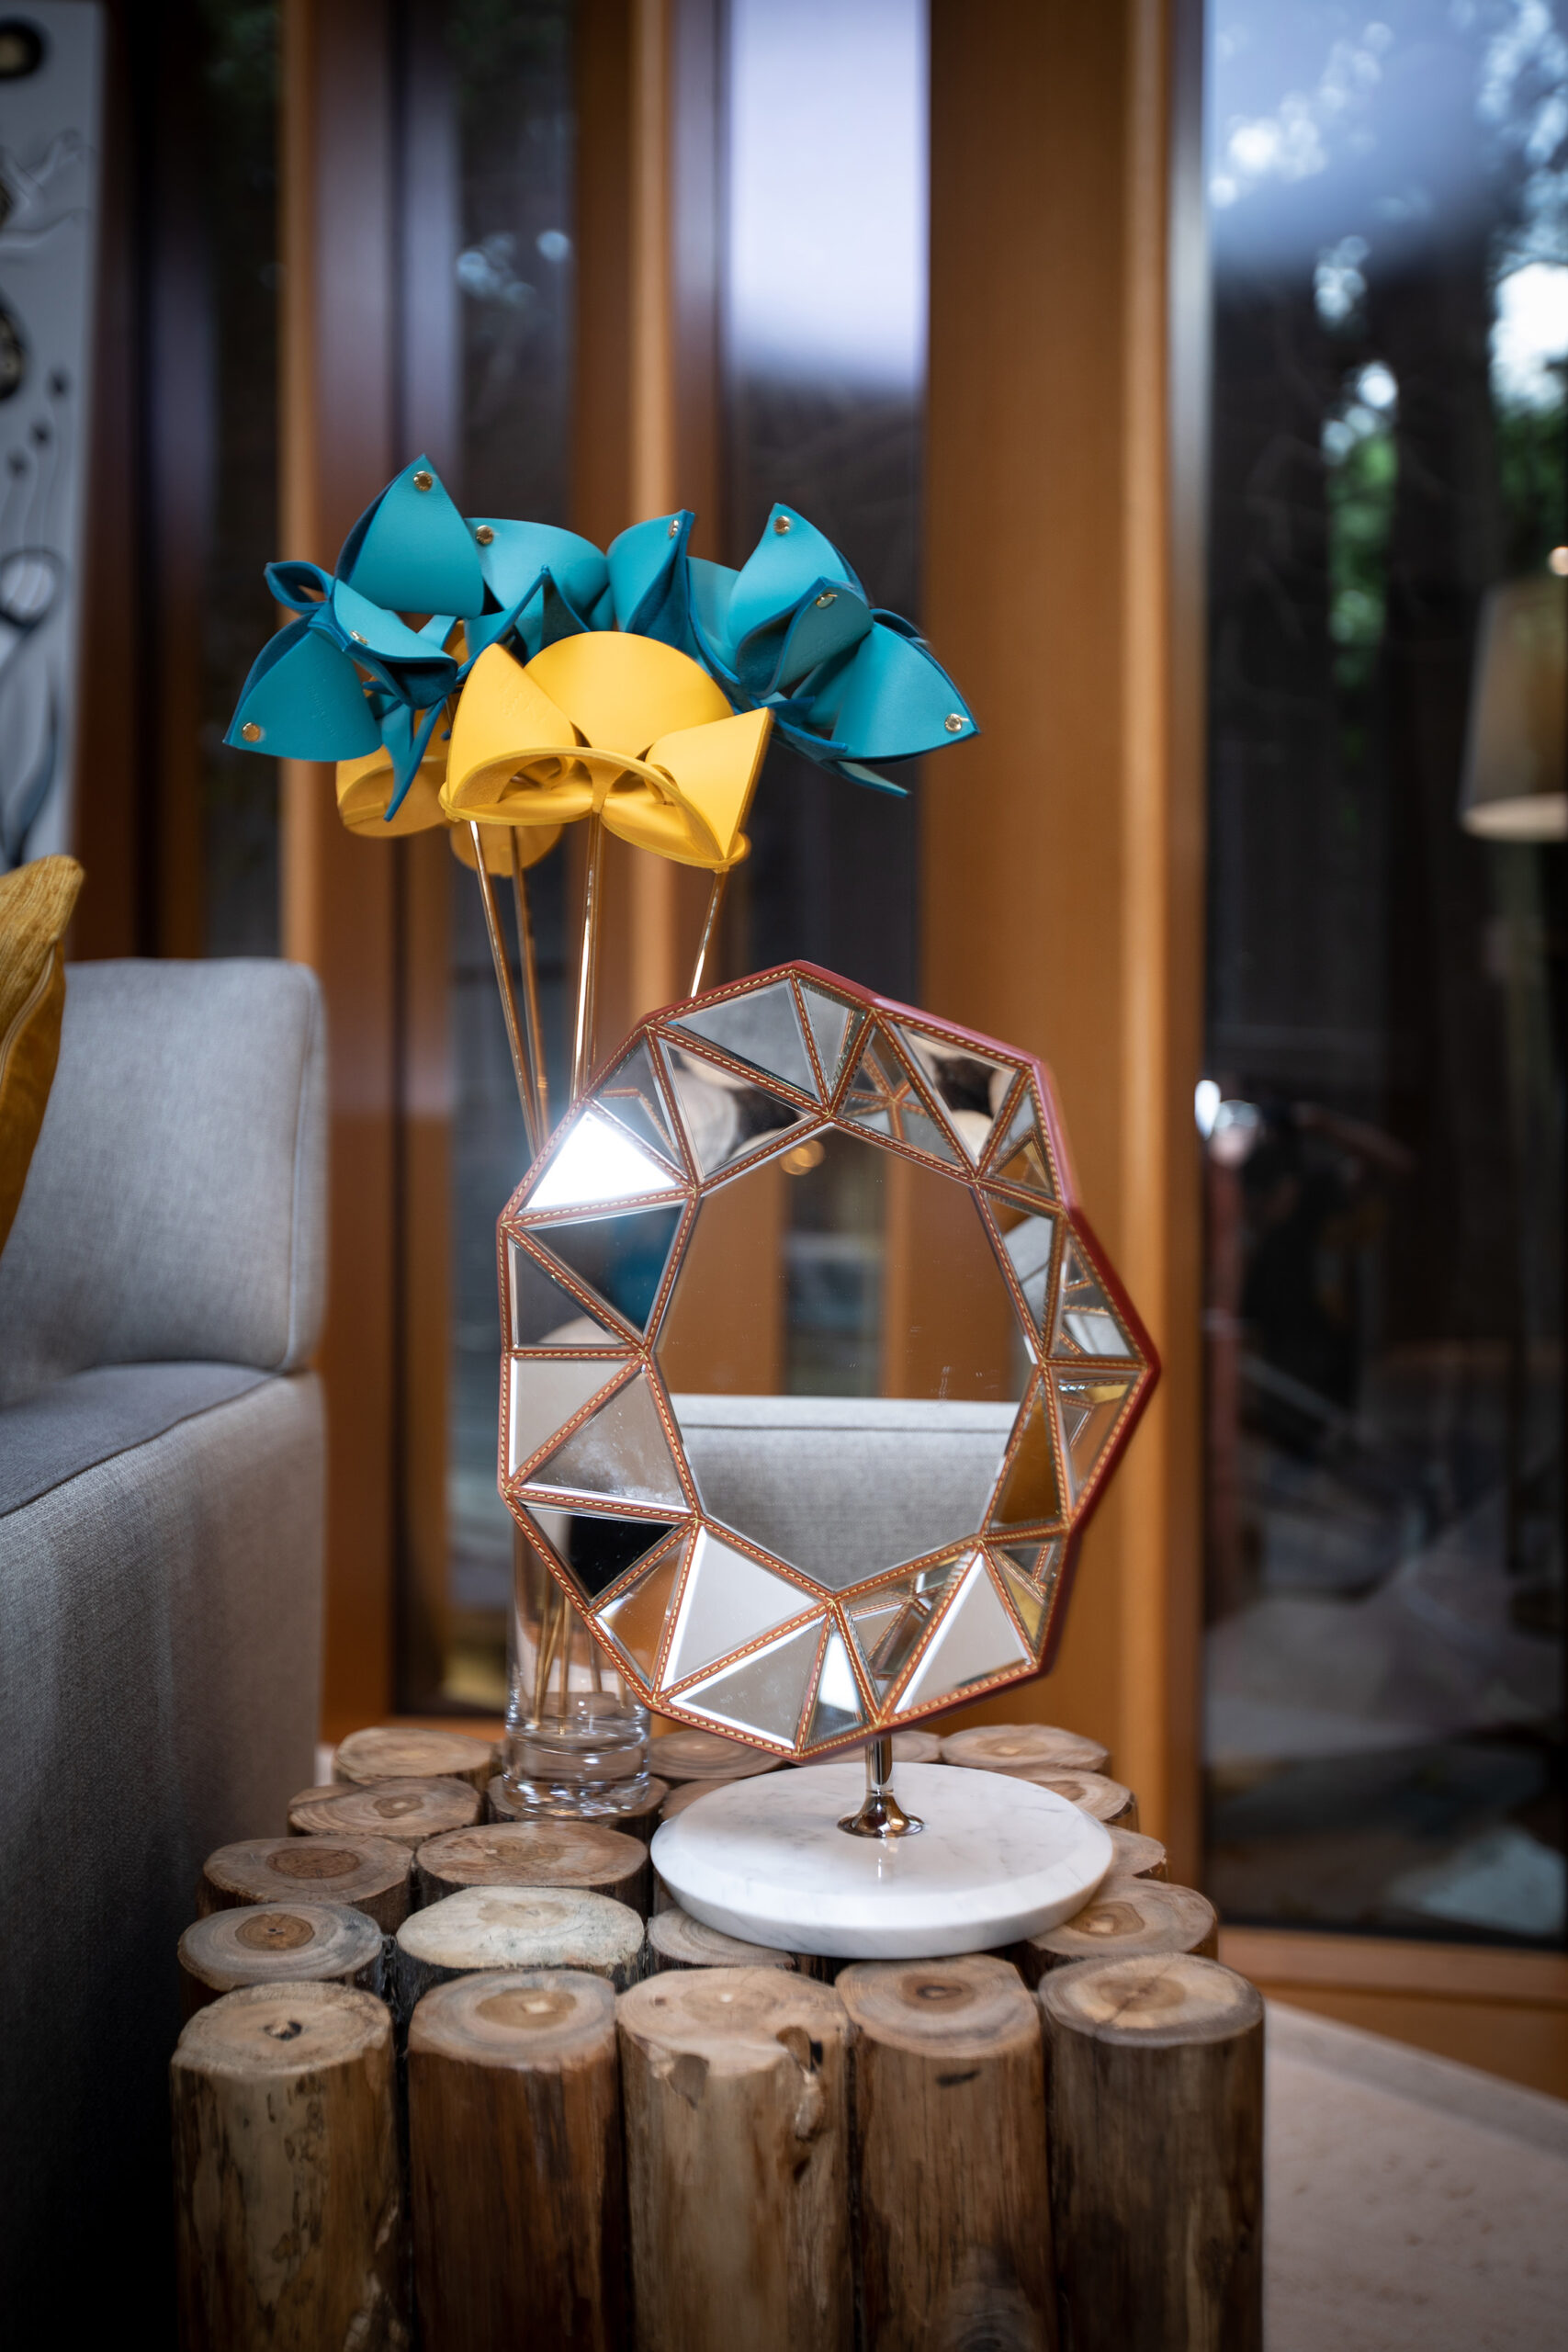 Solar powered Bell Lamp by Barber Osgerby for Louis Vuitton.